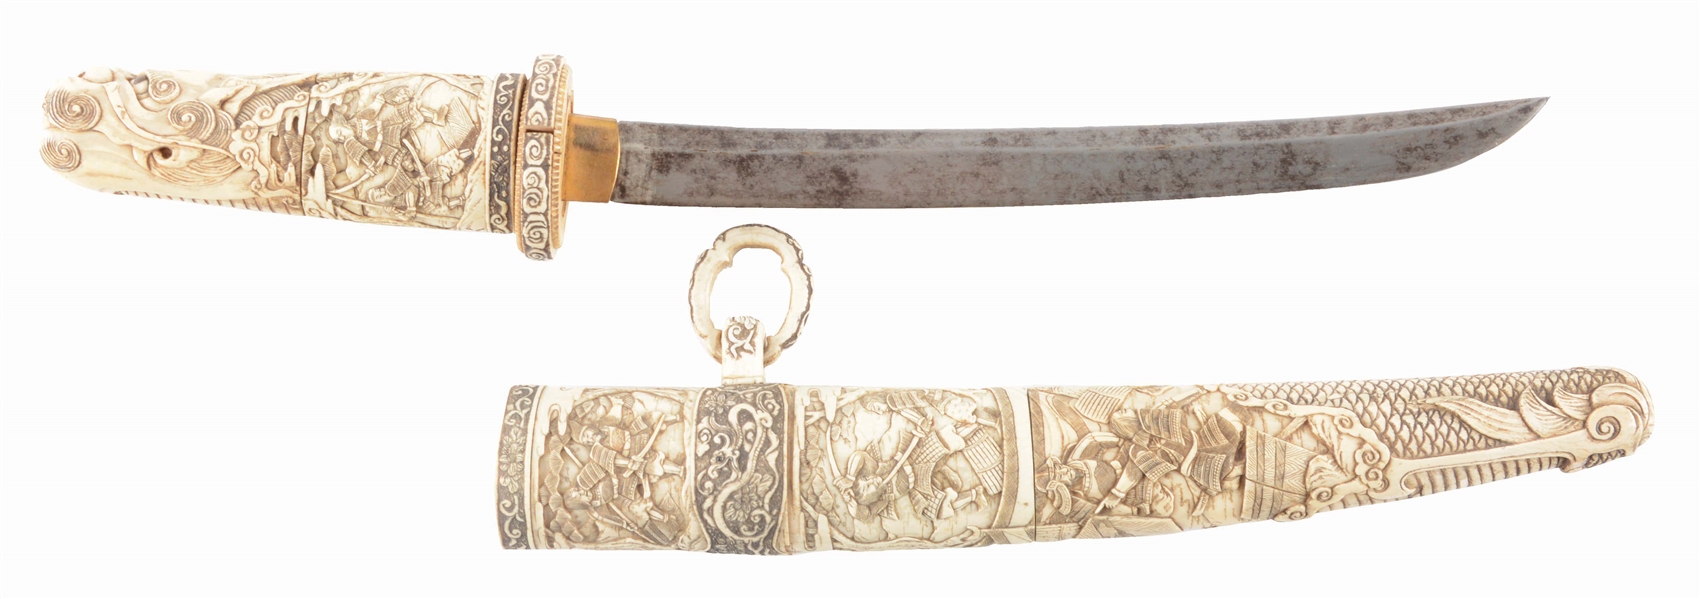 AN UNUSUALLY FINELY CARVED IVORY JAPANESE TANTO, CIRCA 1880.